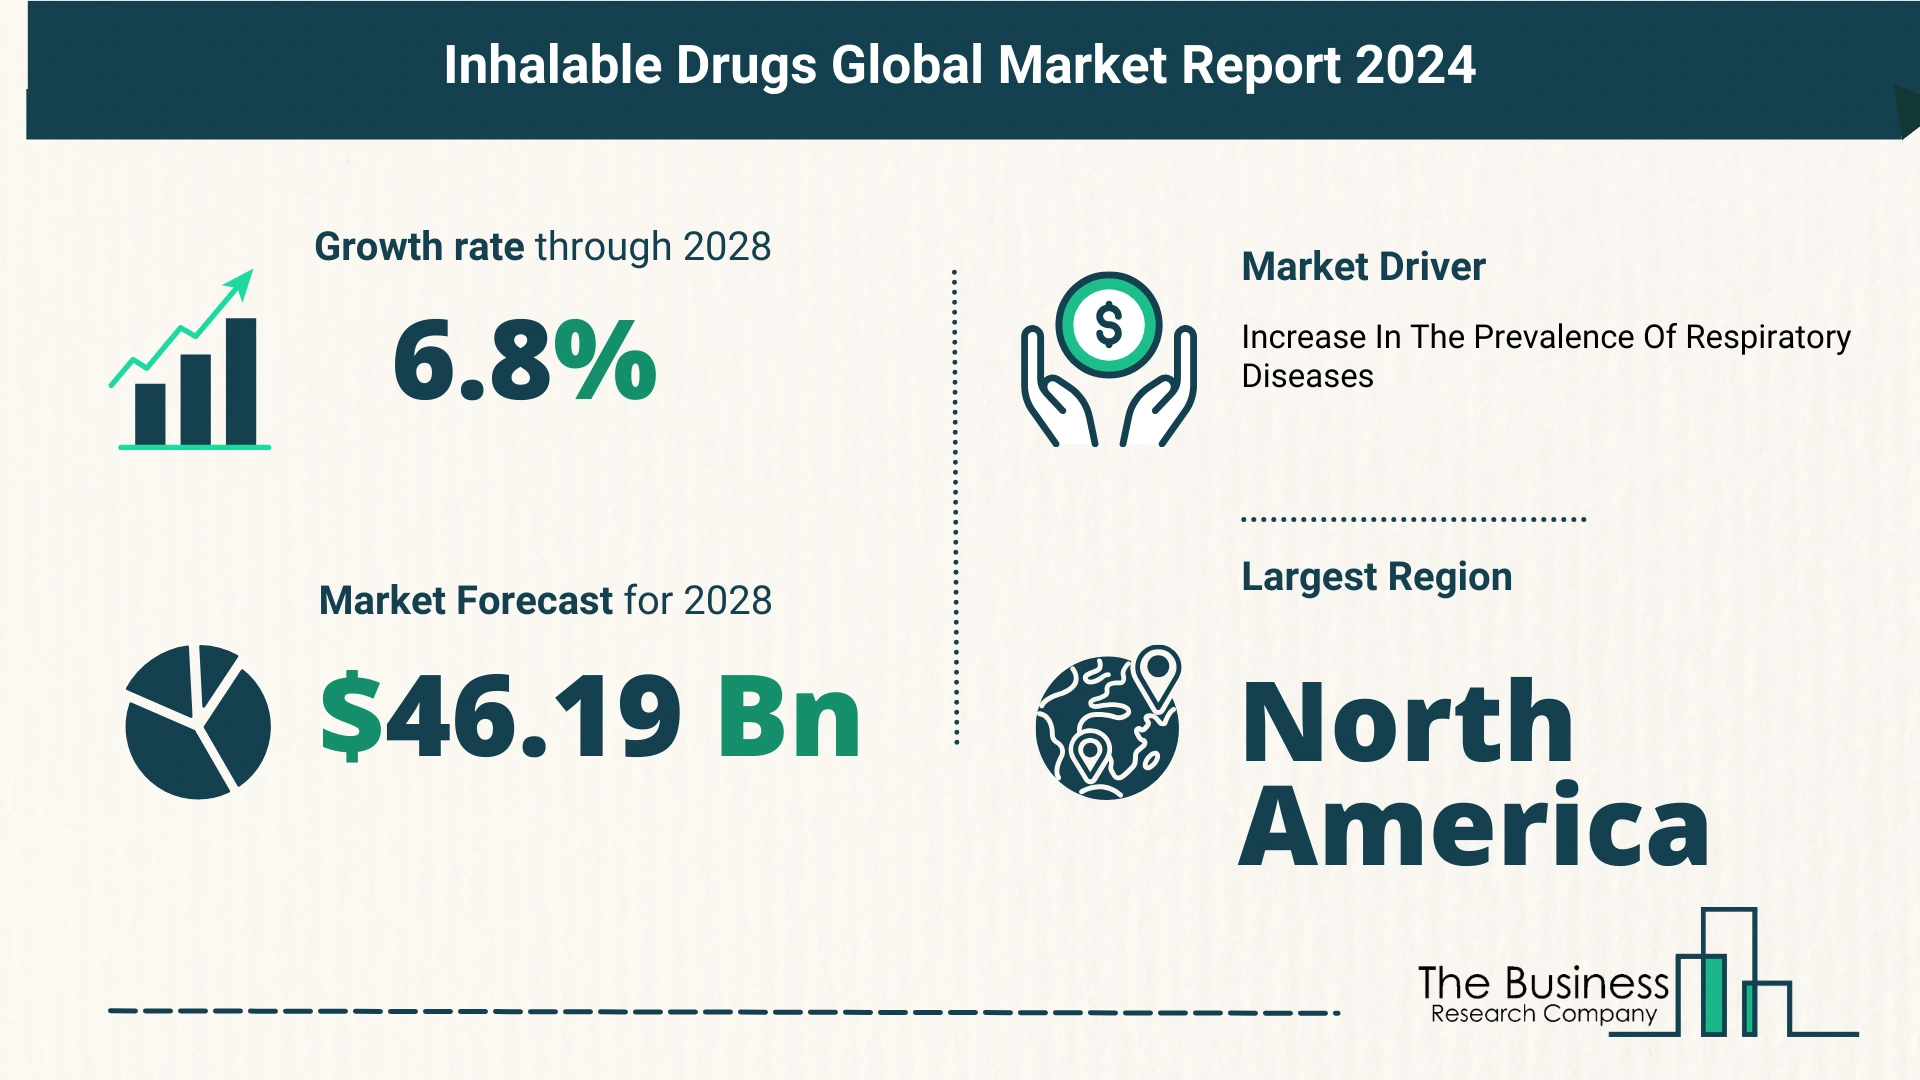 Global Inhalable Drugs Market Report 2024 – Top Market Trends And Opportunities